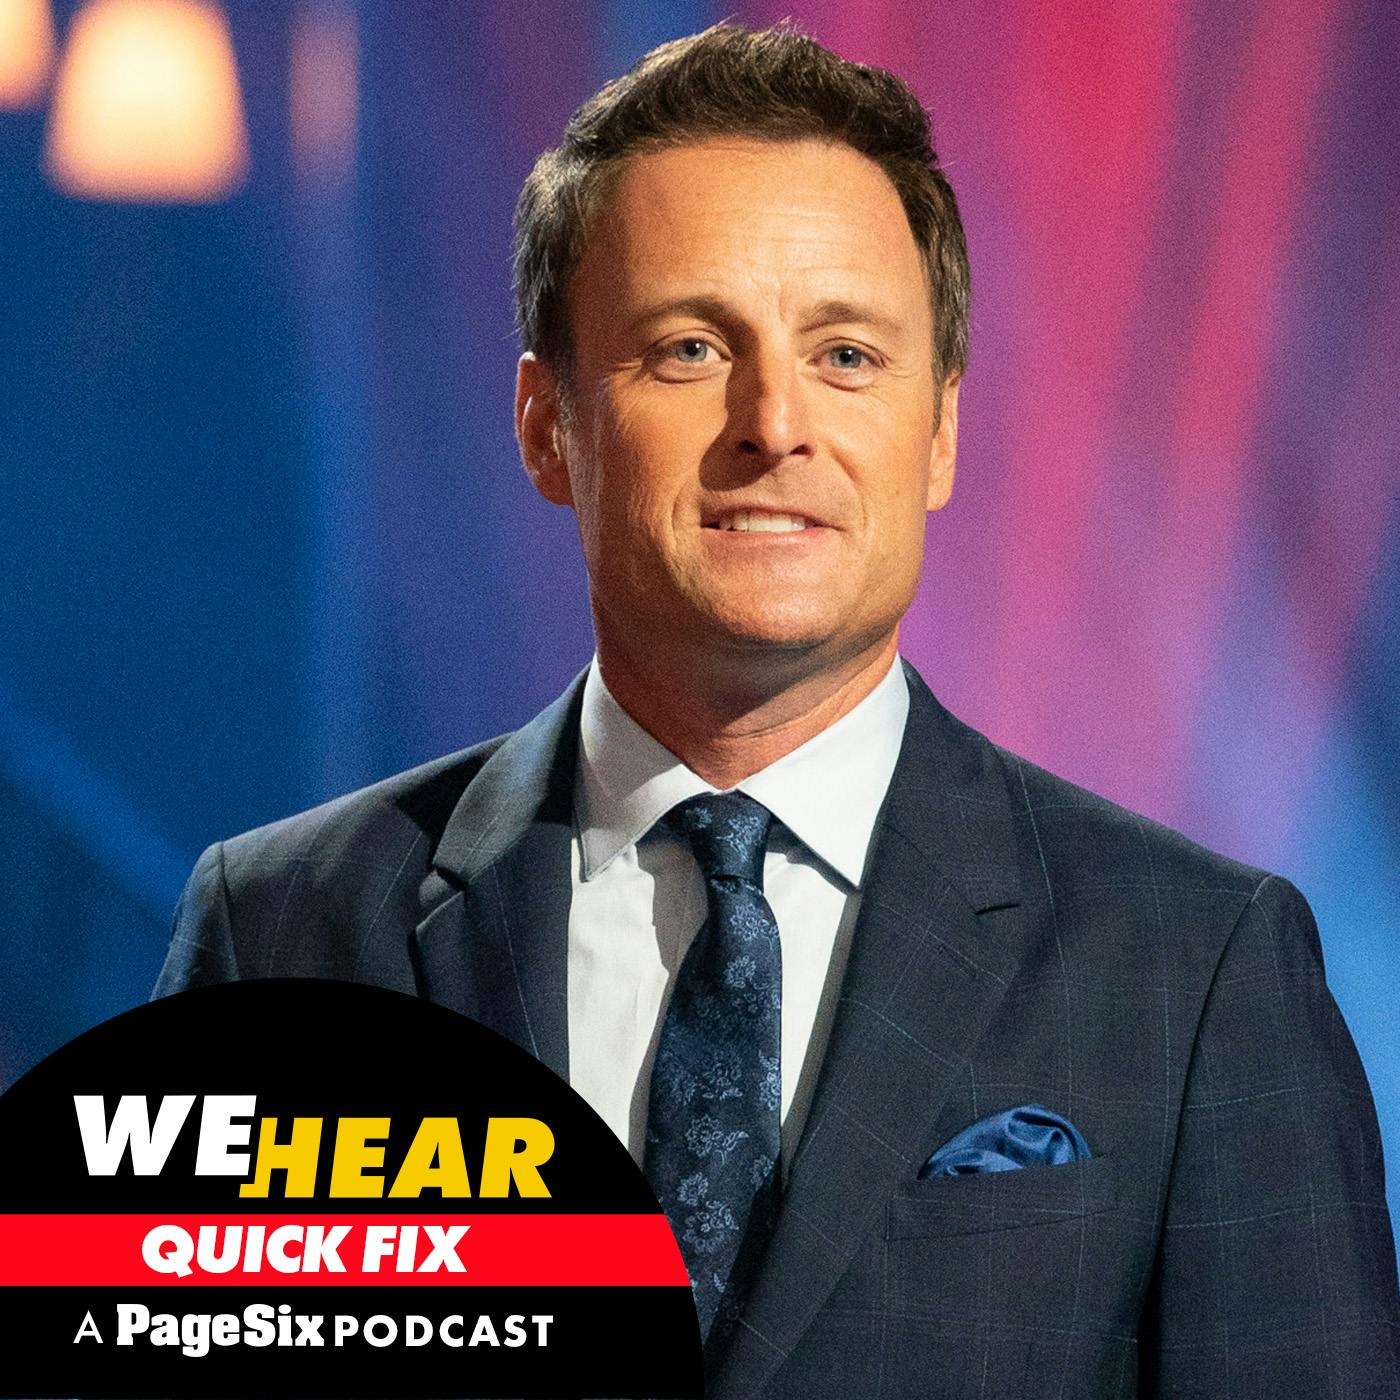 Chris Harrison calls ’The Bachelor’ franchise ’very toxic’ nearly 2 years after exit, more